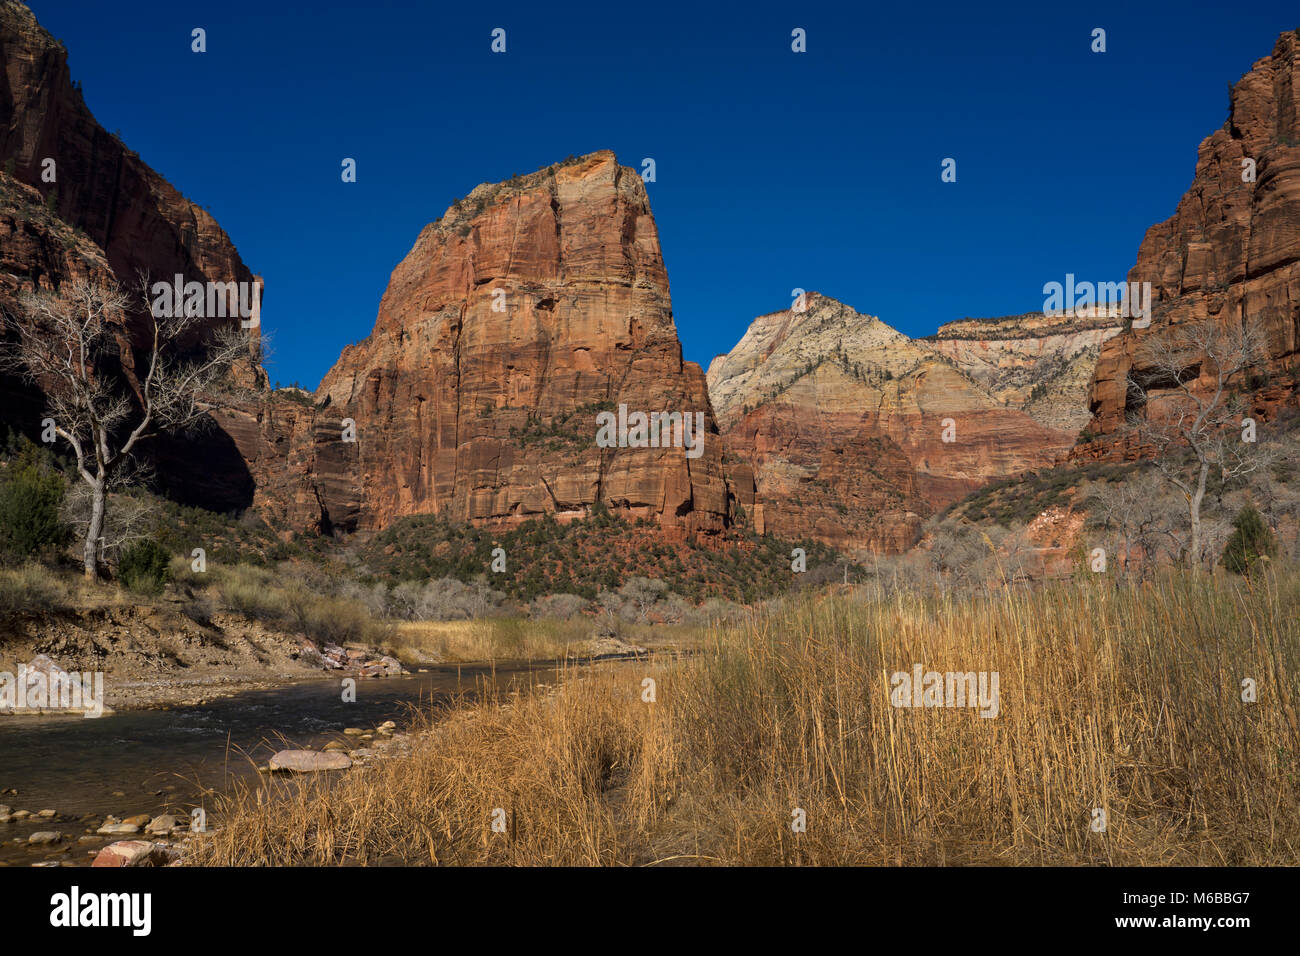 Zion National Park, Utah, United States of America Banque D'Images